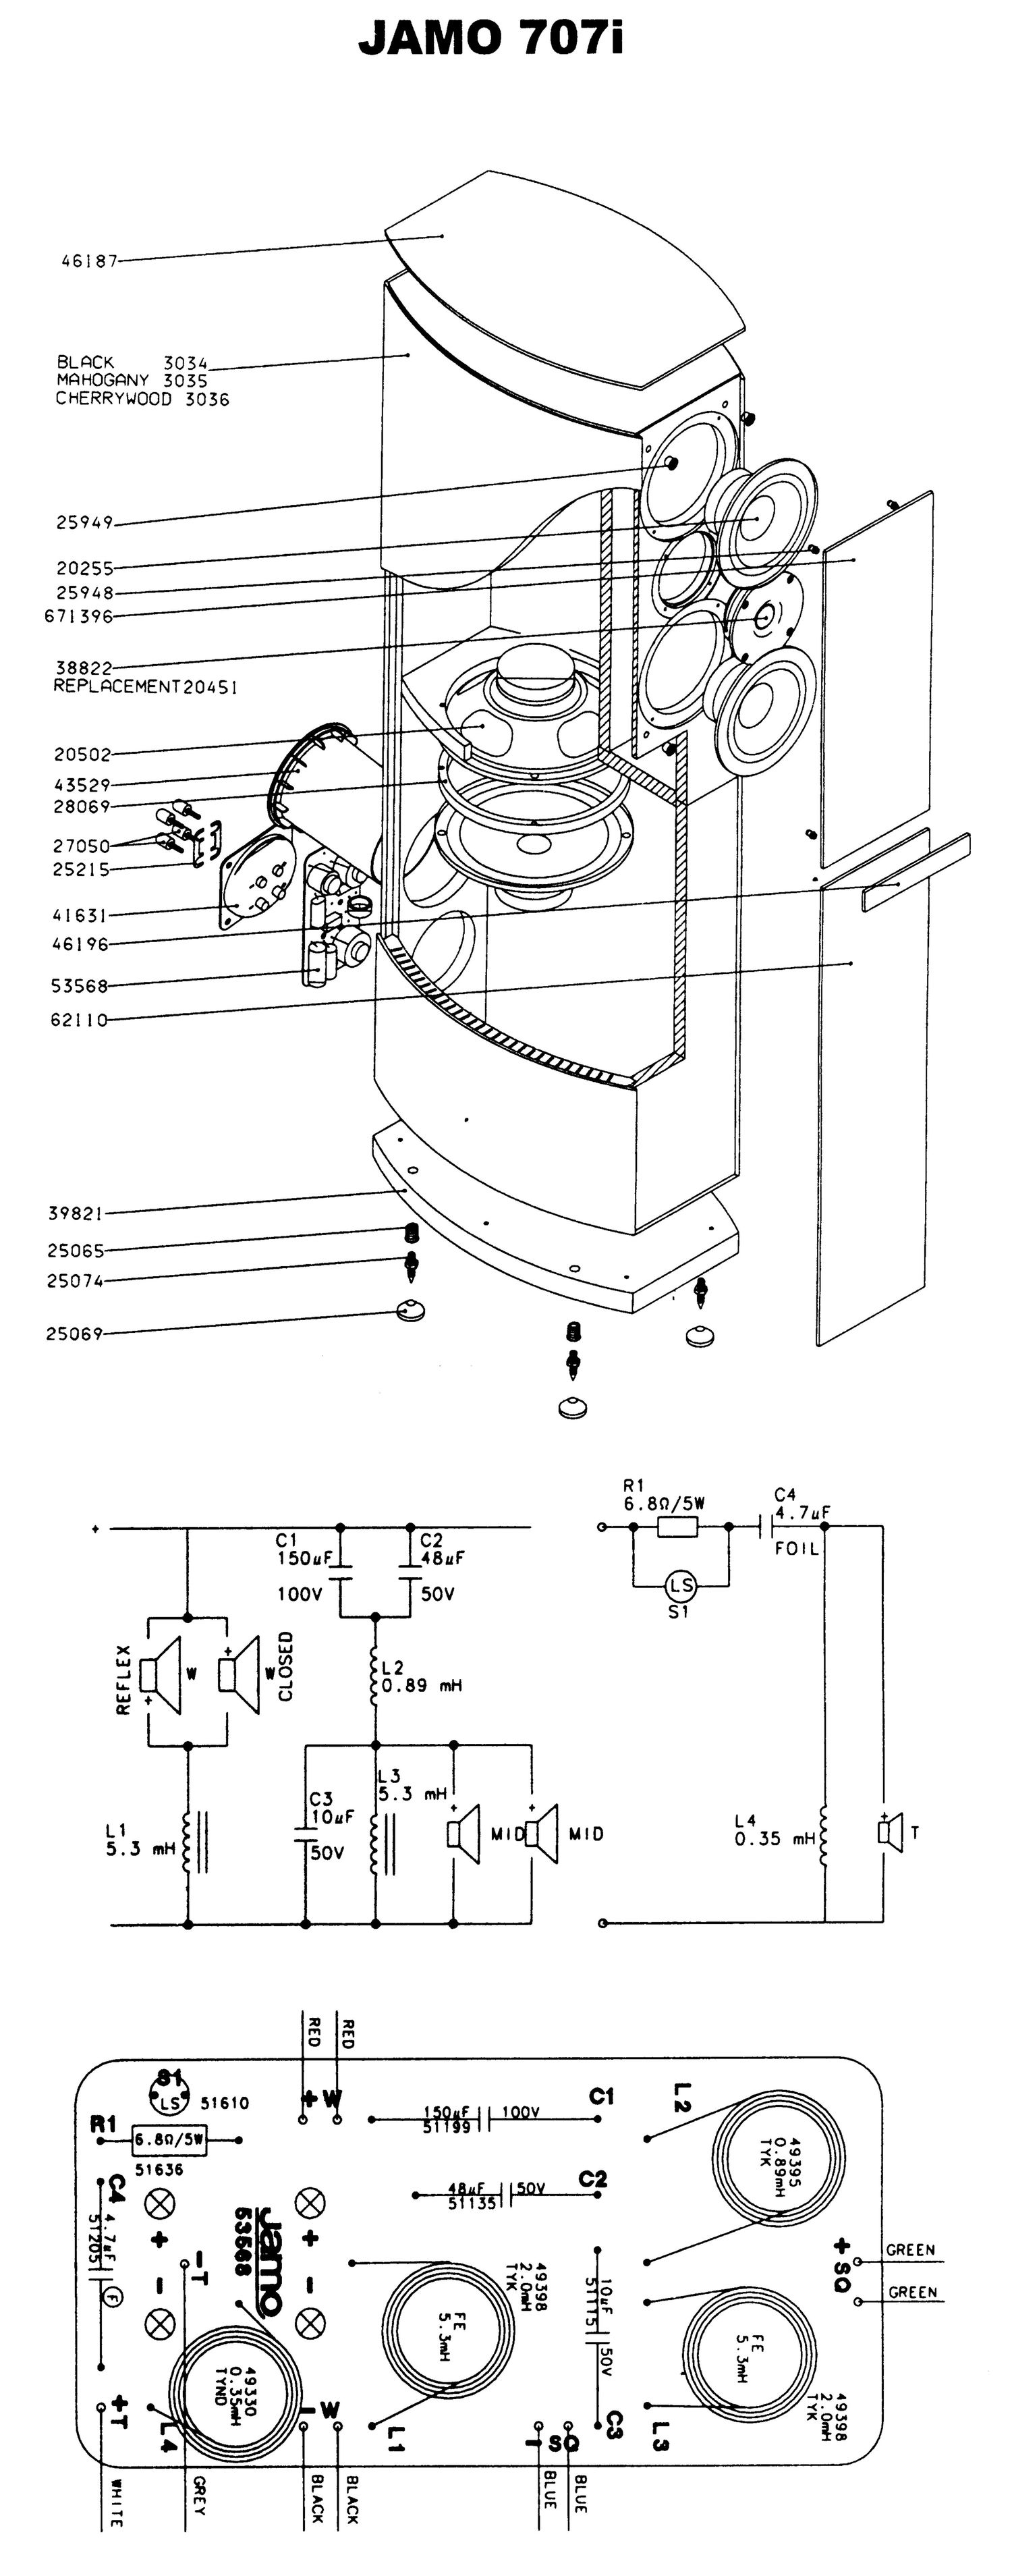 jamo 707i schematic assembly